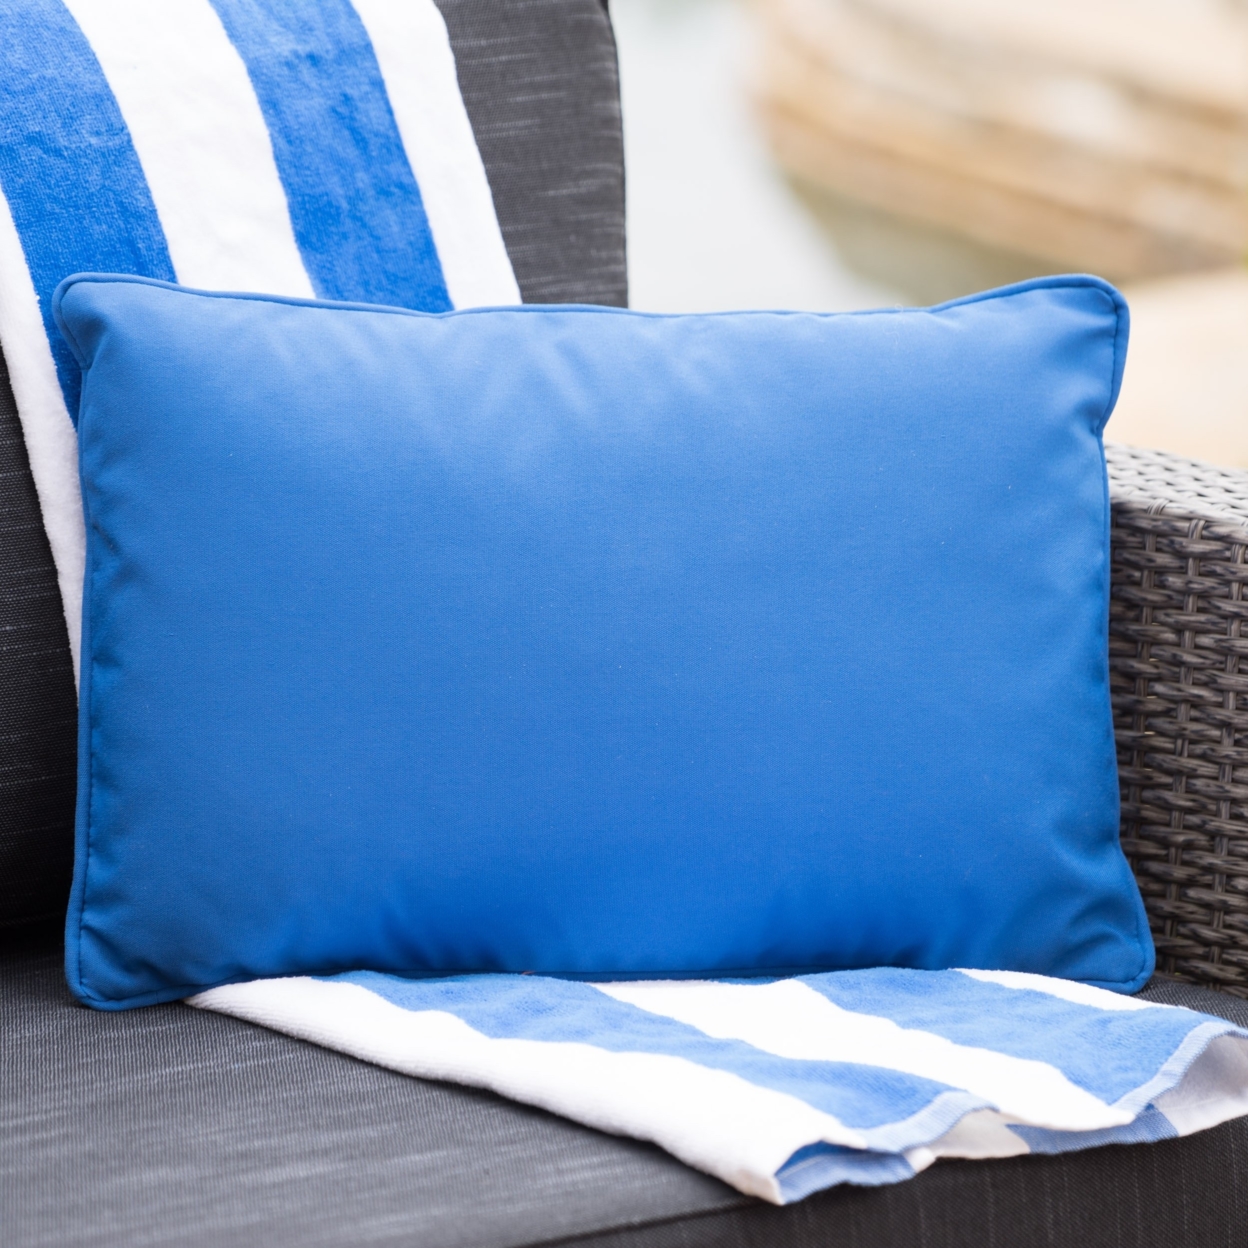 Corona Outdoor Rectangular Water Resistant Pillow(s) - Blue, Qty Of 2